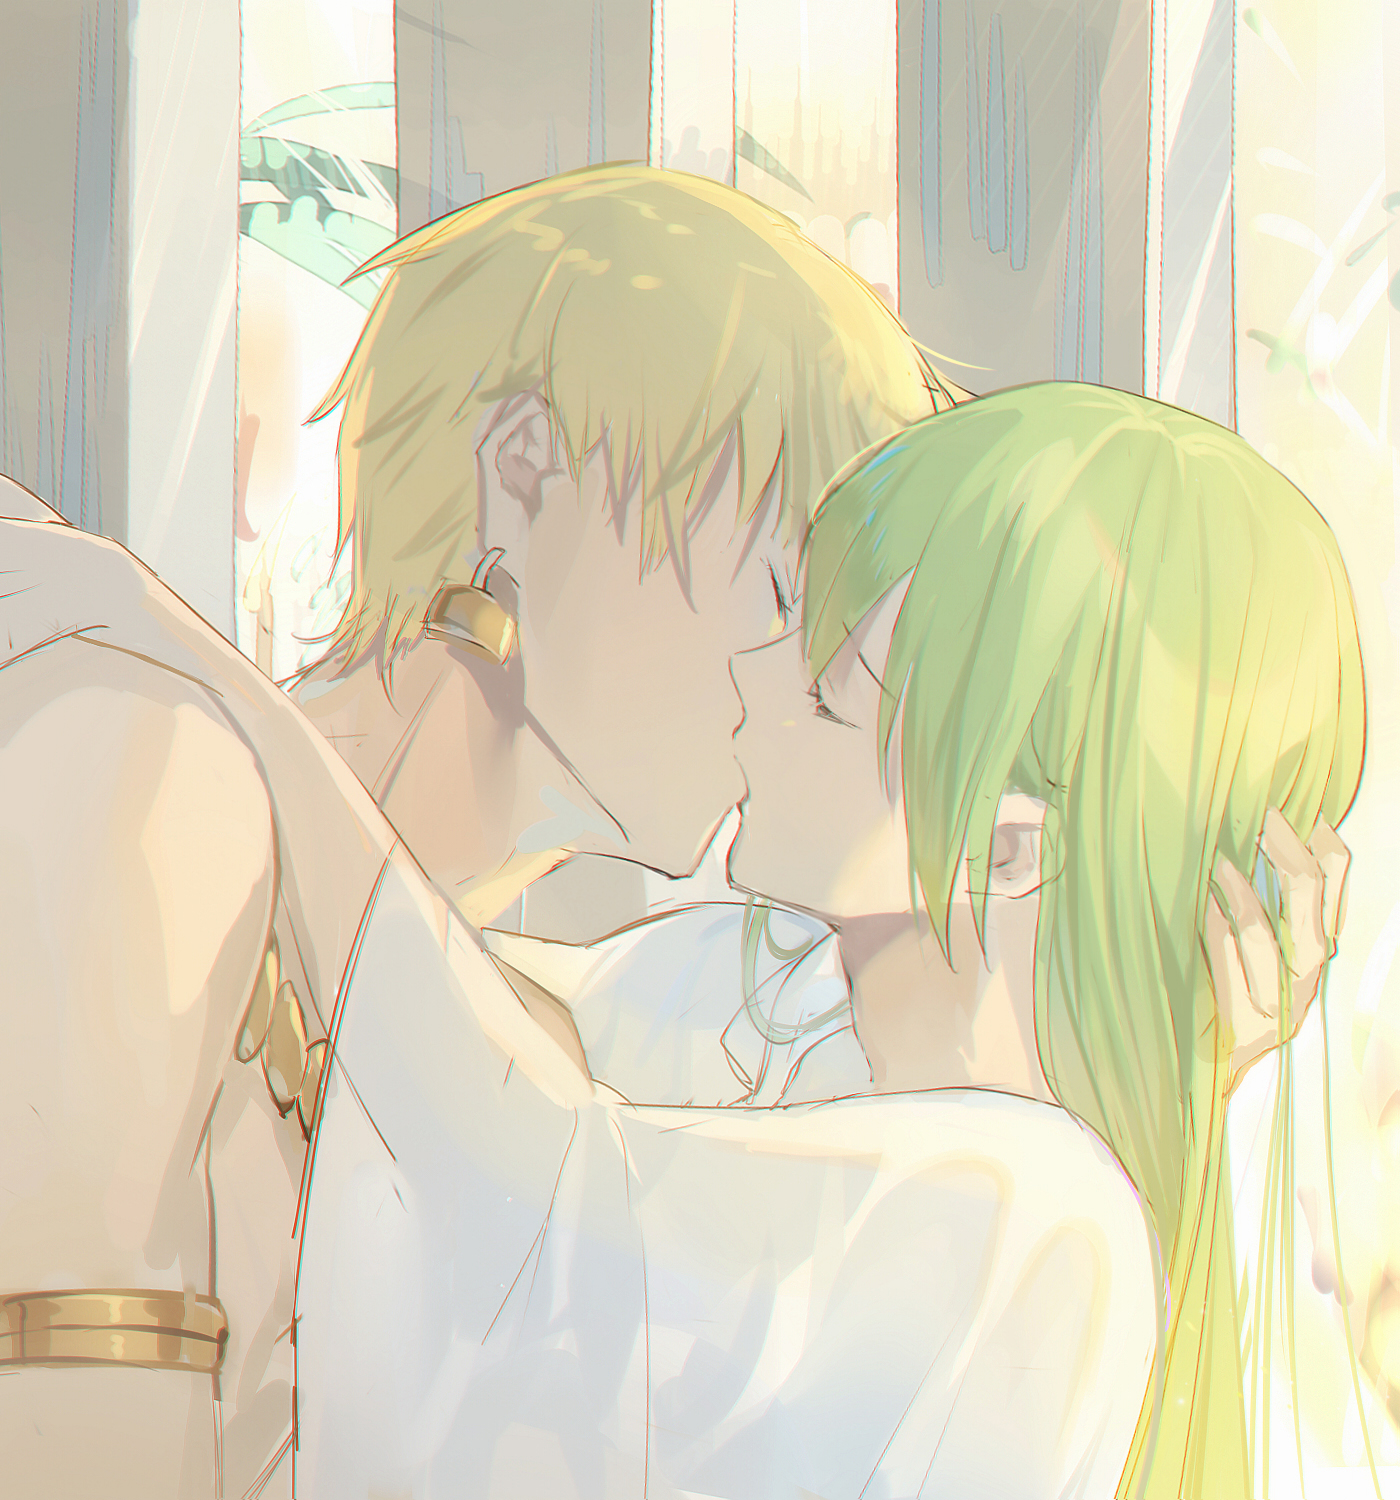 Anime 1400x1500 Fate series Fate/Grand Order Yaoi hugging couple anime boys kissing femboy robes bare shoulders 2D anime closed eyes hand(s) on head Gilgamesh Enkidu (FGO) green hair long hair blonde short hair fan art palace see-through robe armlet jewelry